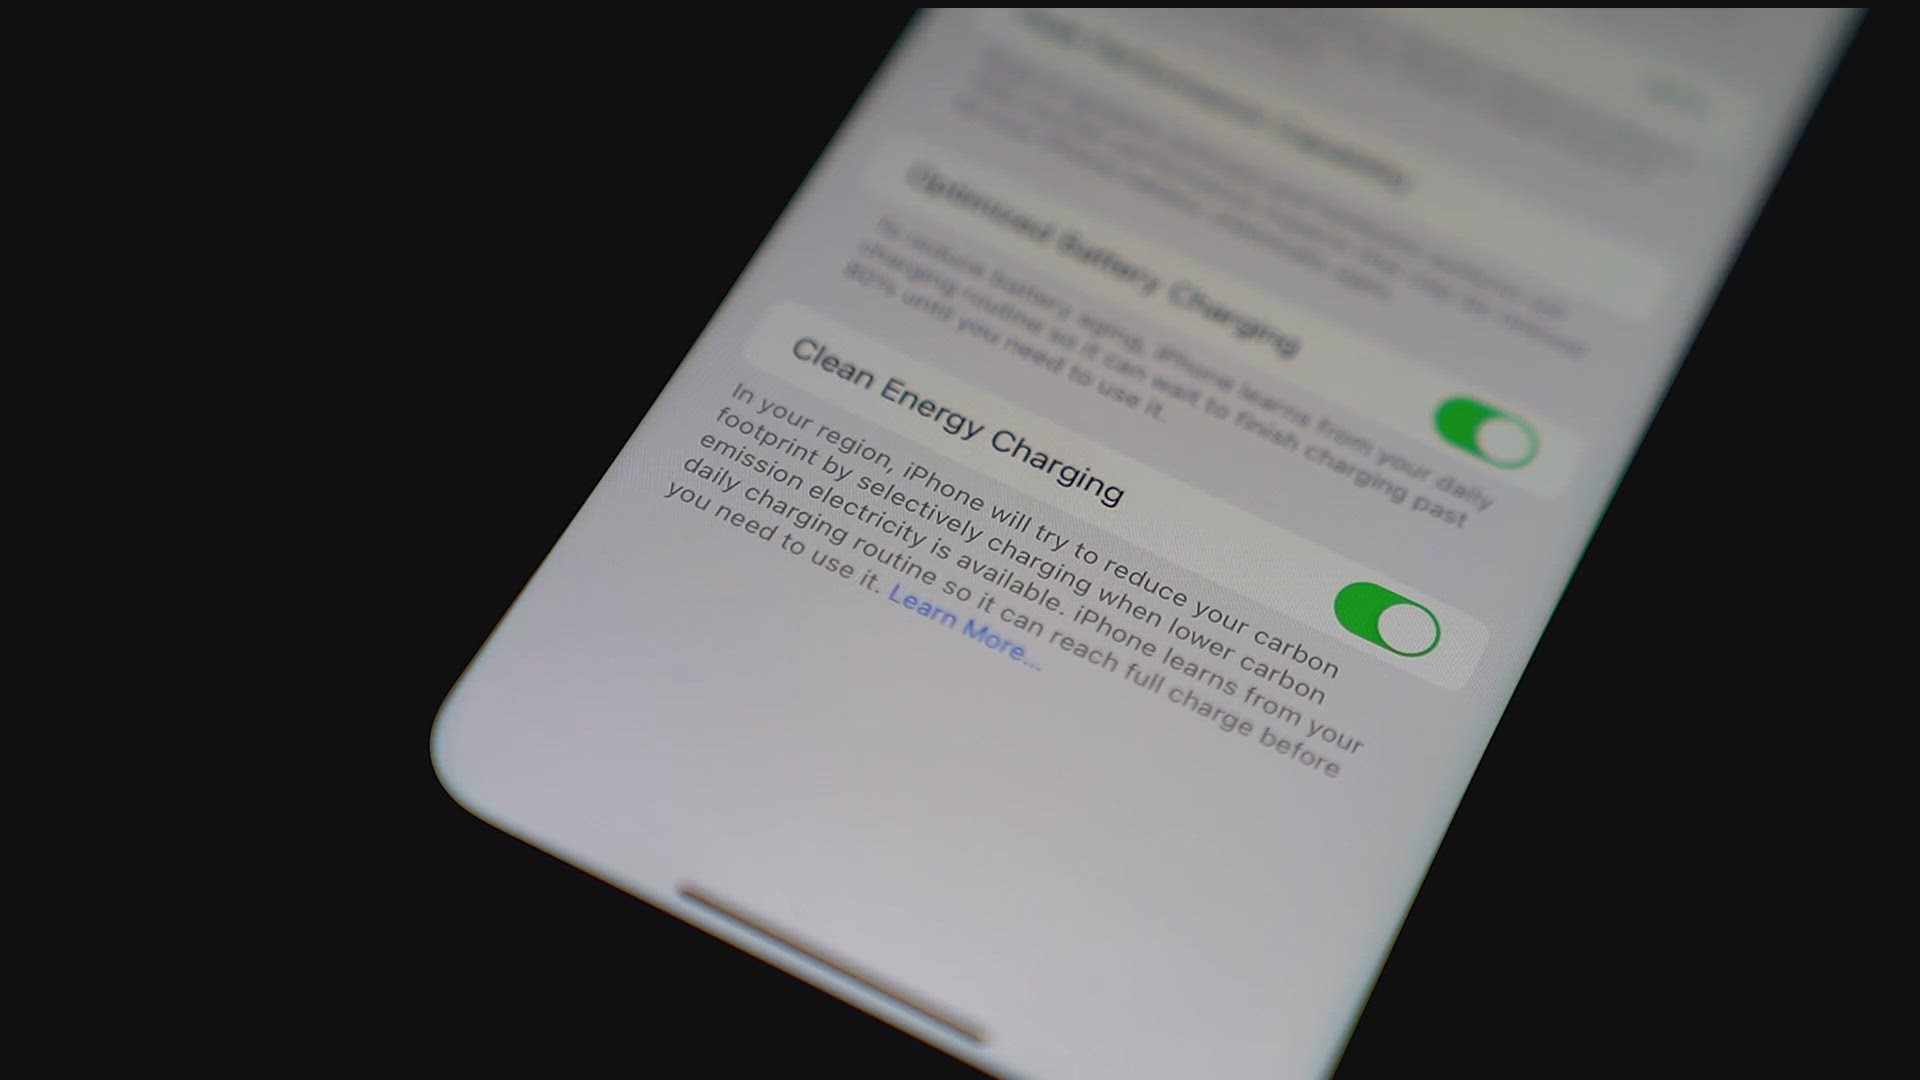 Apple rolled out the feature last fall in the U.S. with the aim of getting iPhones to charge more at times when the grid is using cleaner energy.